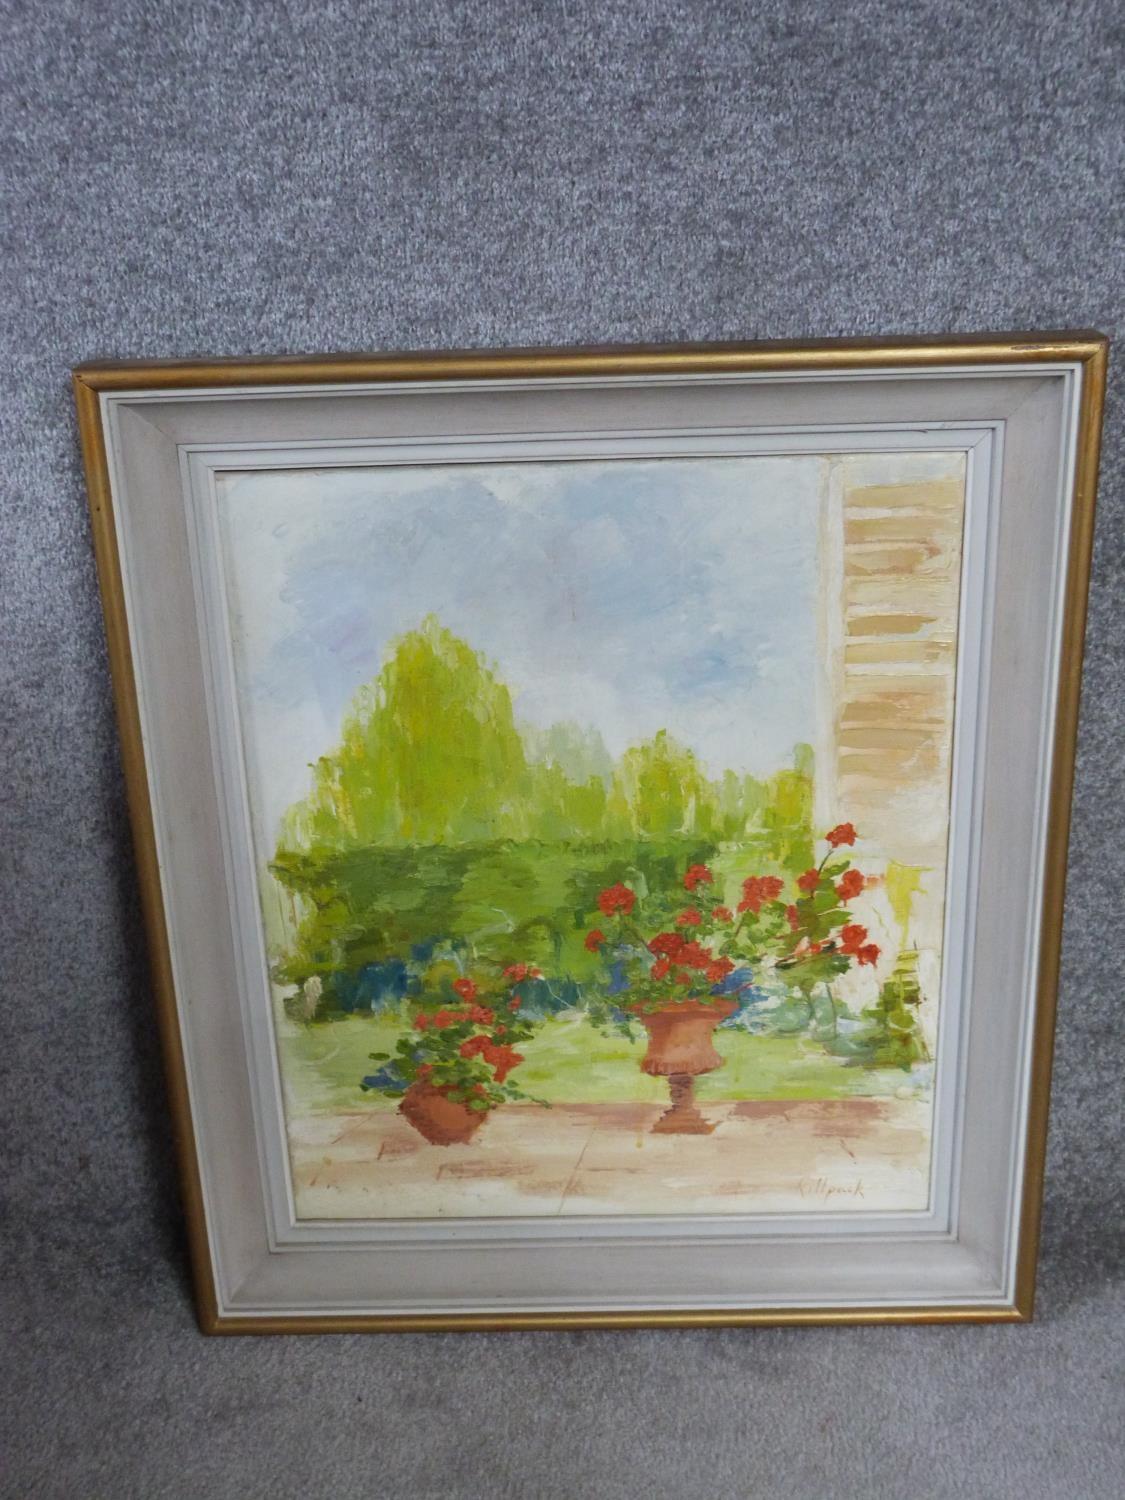 A framed oil on canvas by British artist Mona Killpack (16 March 1918 ? 6 May 2009). Titled 'Patio - Image 2 of 5